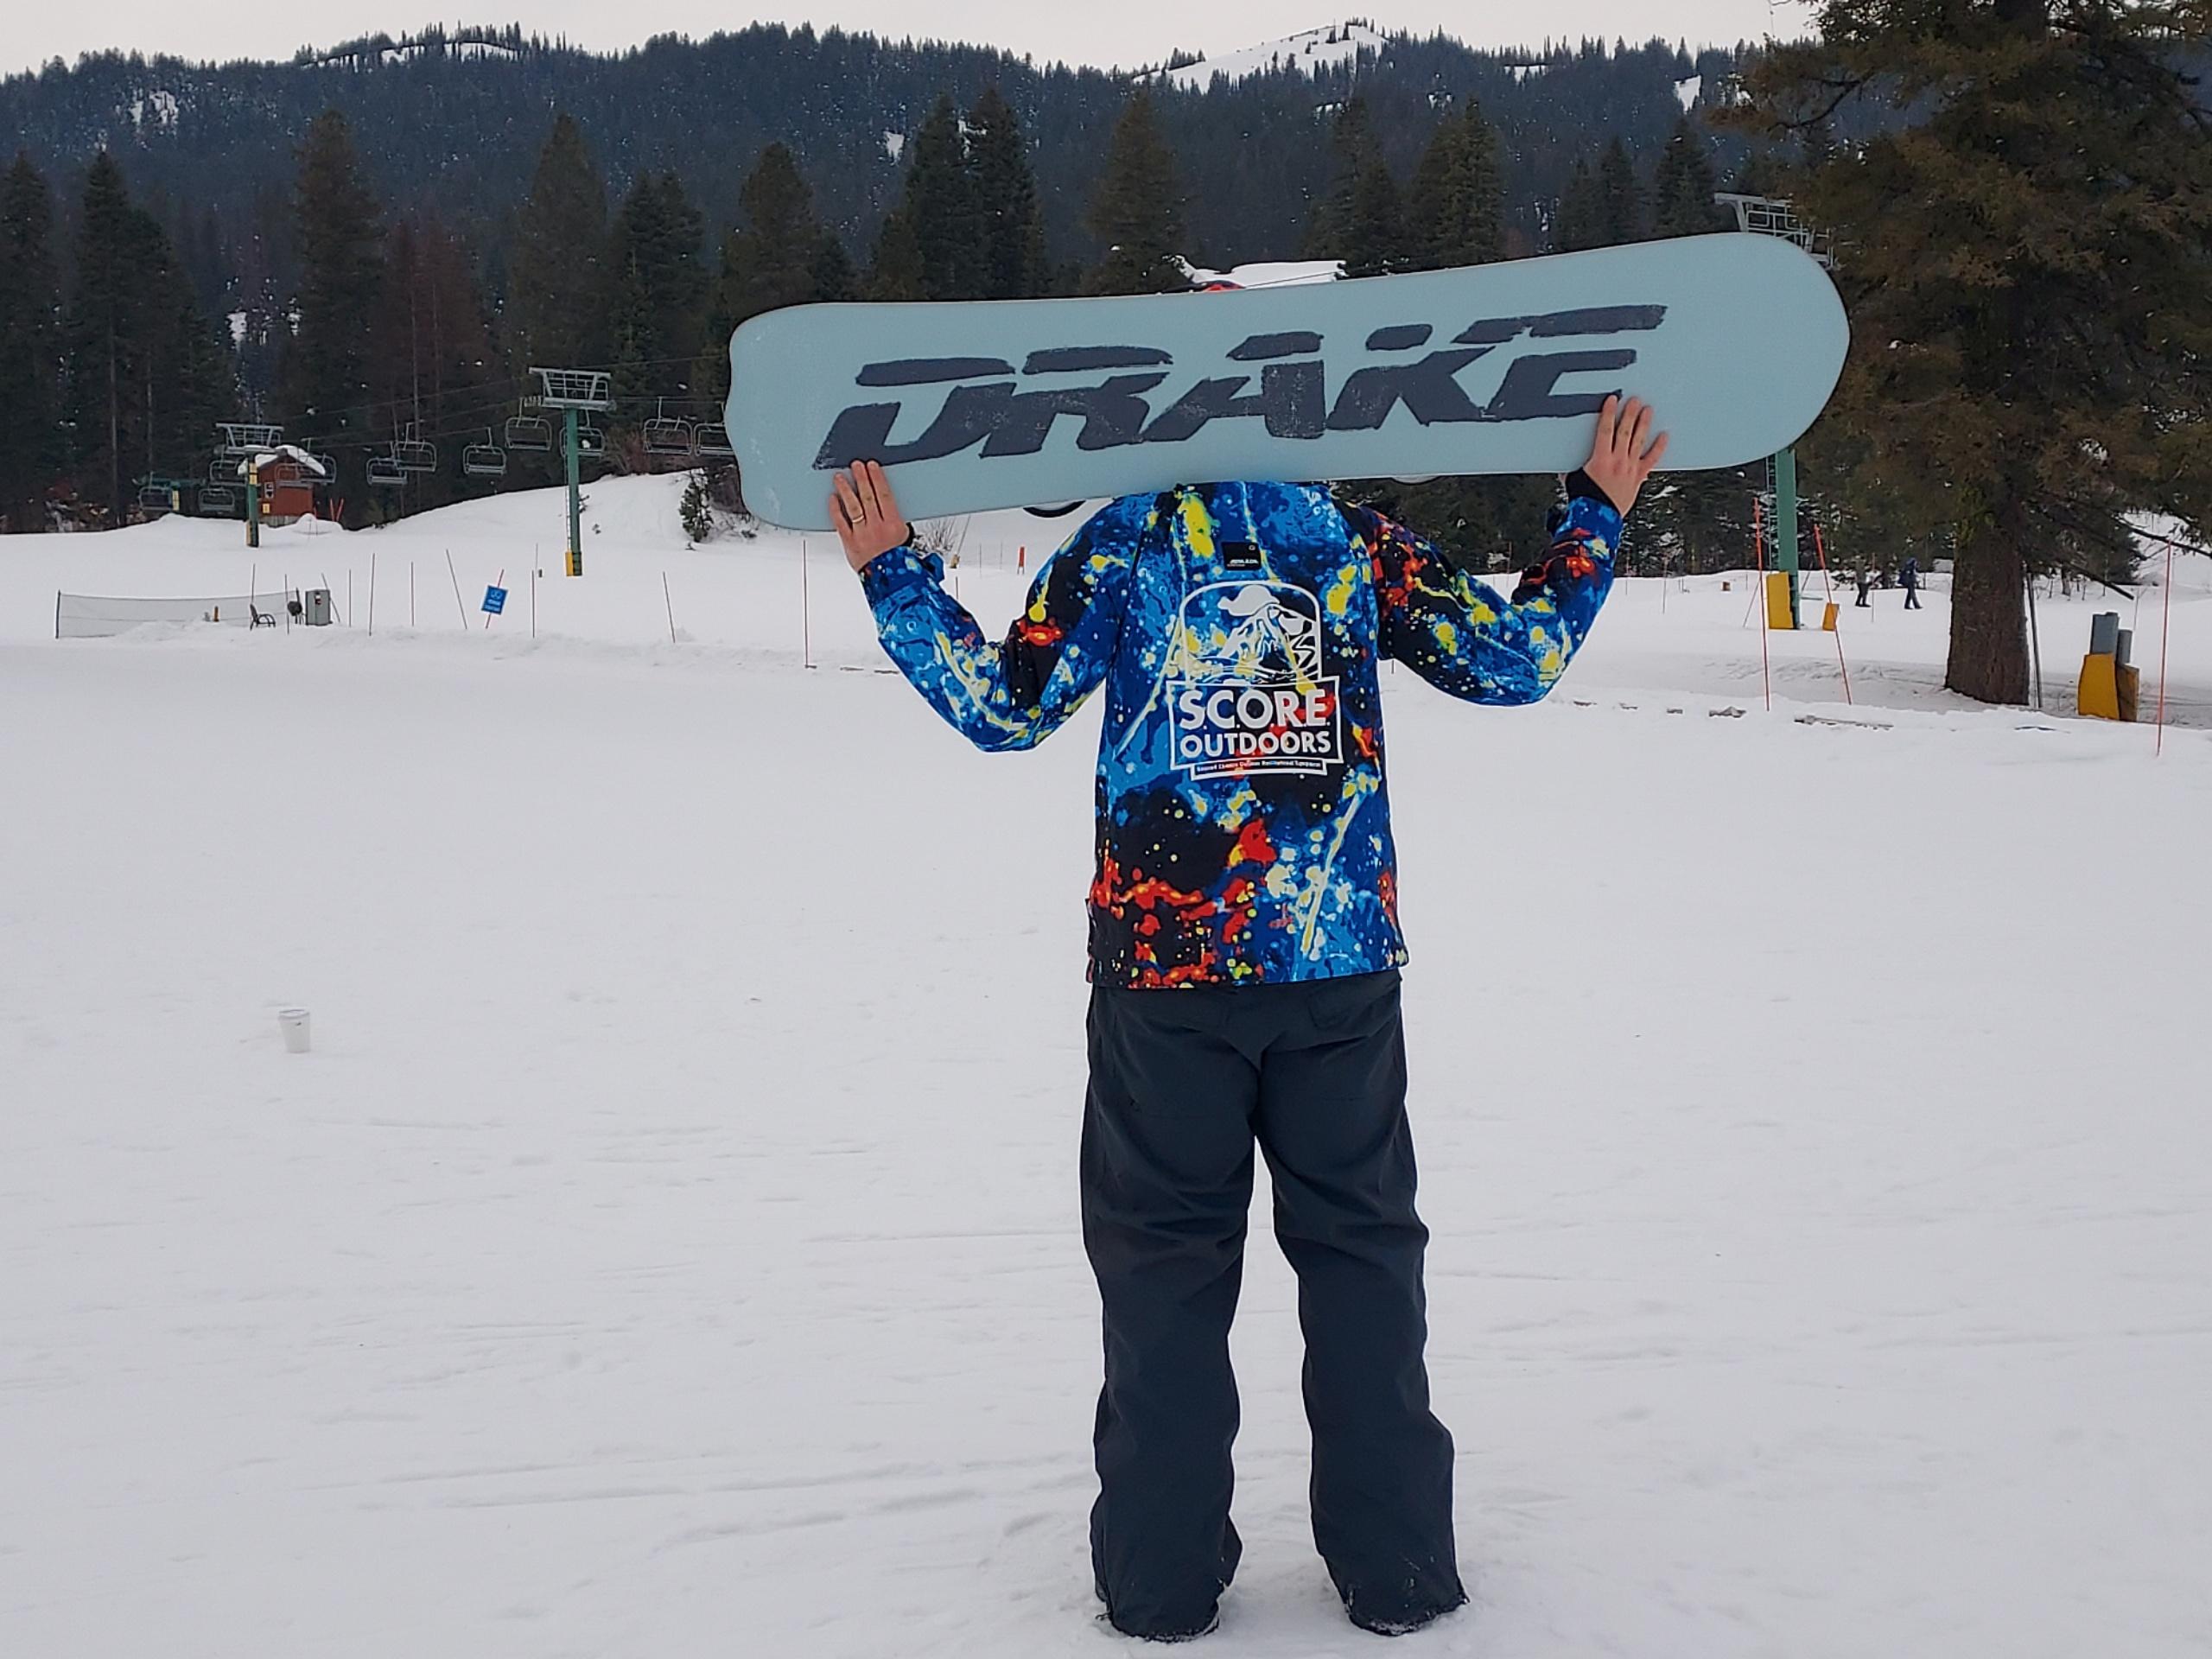 Drake Snowboards, Bindings, & Northwave Boots | Score Outdoors